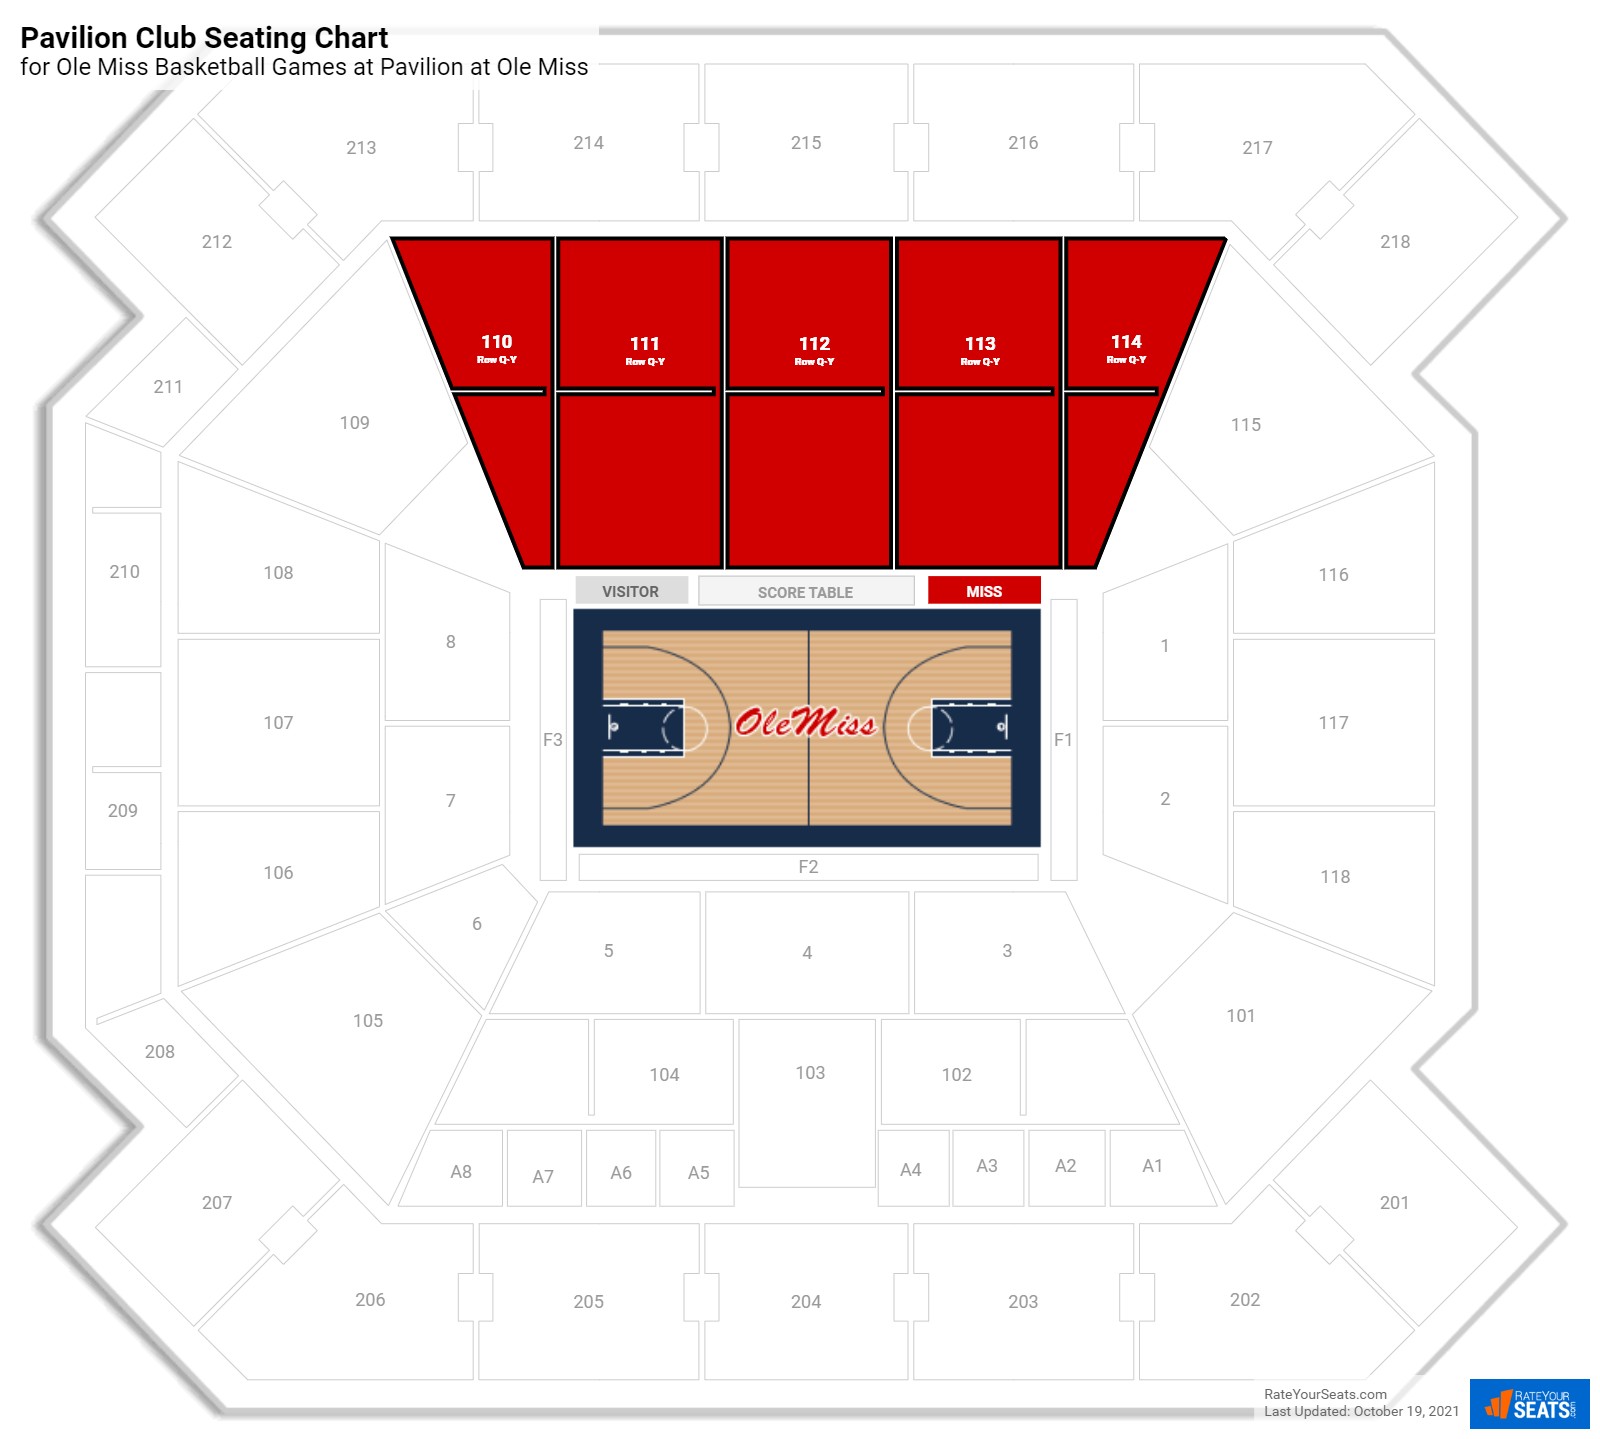 Ole Miss Pavilion Club Seating Chart at Pavilion at Ole Miss